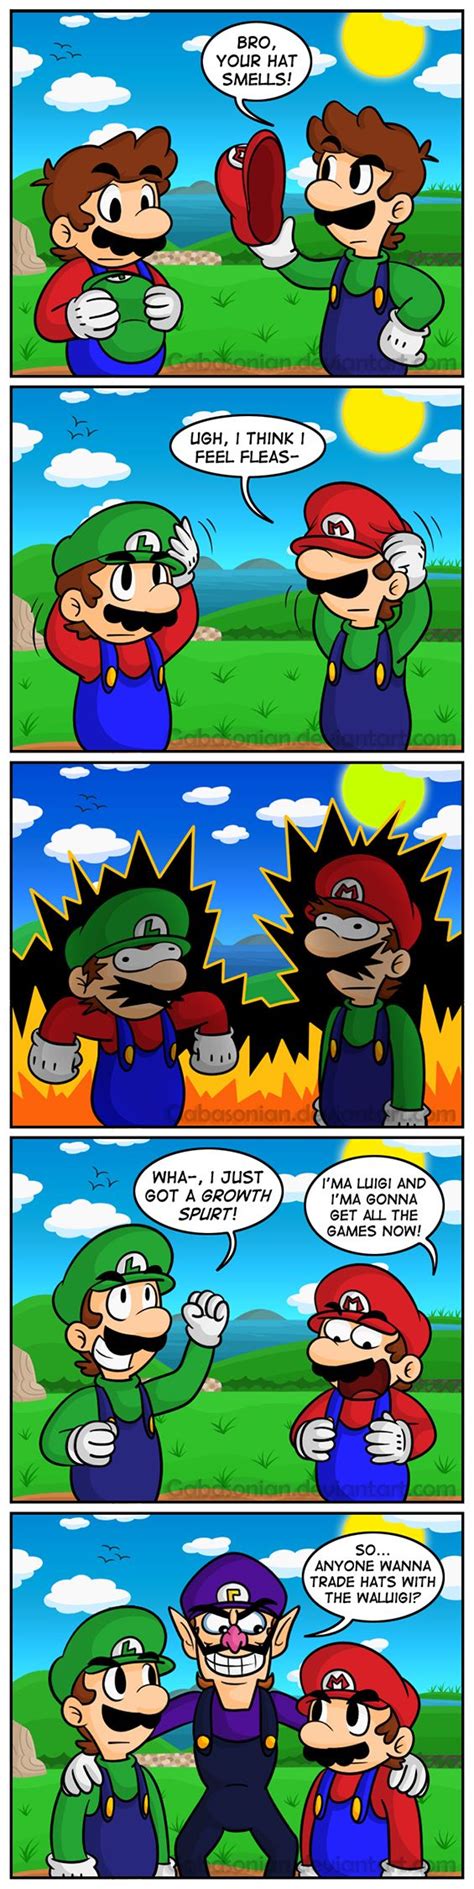 183 Best Mario Fanfic Comics Images On Pinterest Video Games Videogames And Super Mario Bros